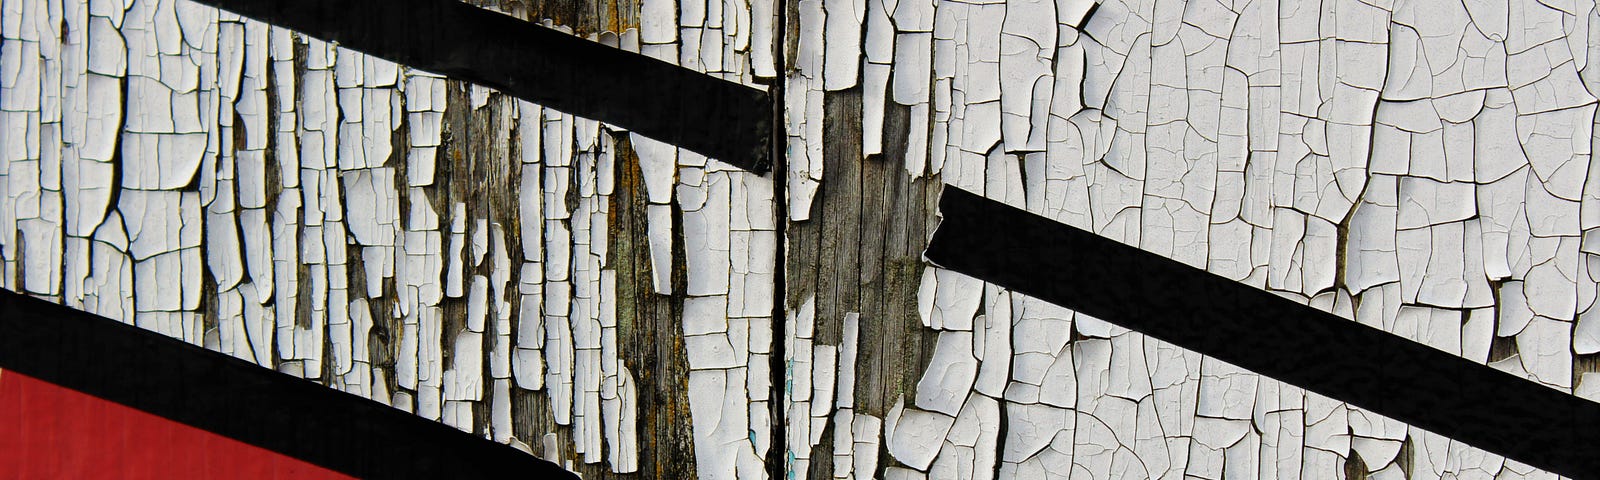 deeply flaked paint on a wooden wall